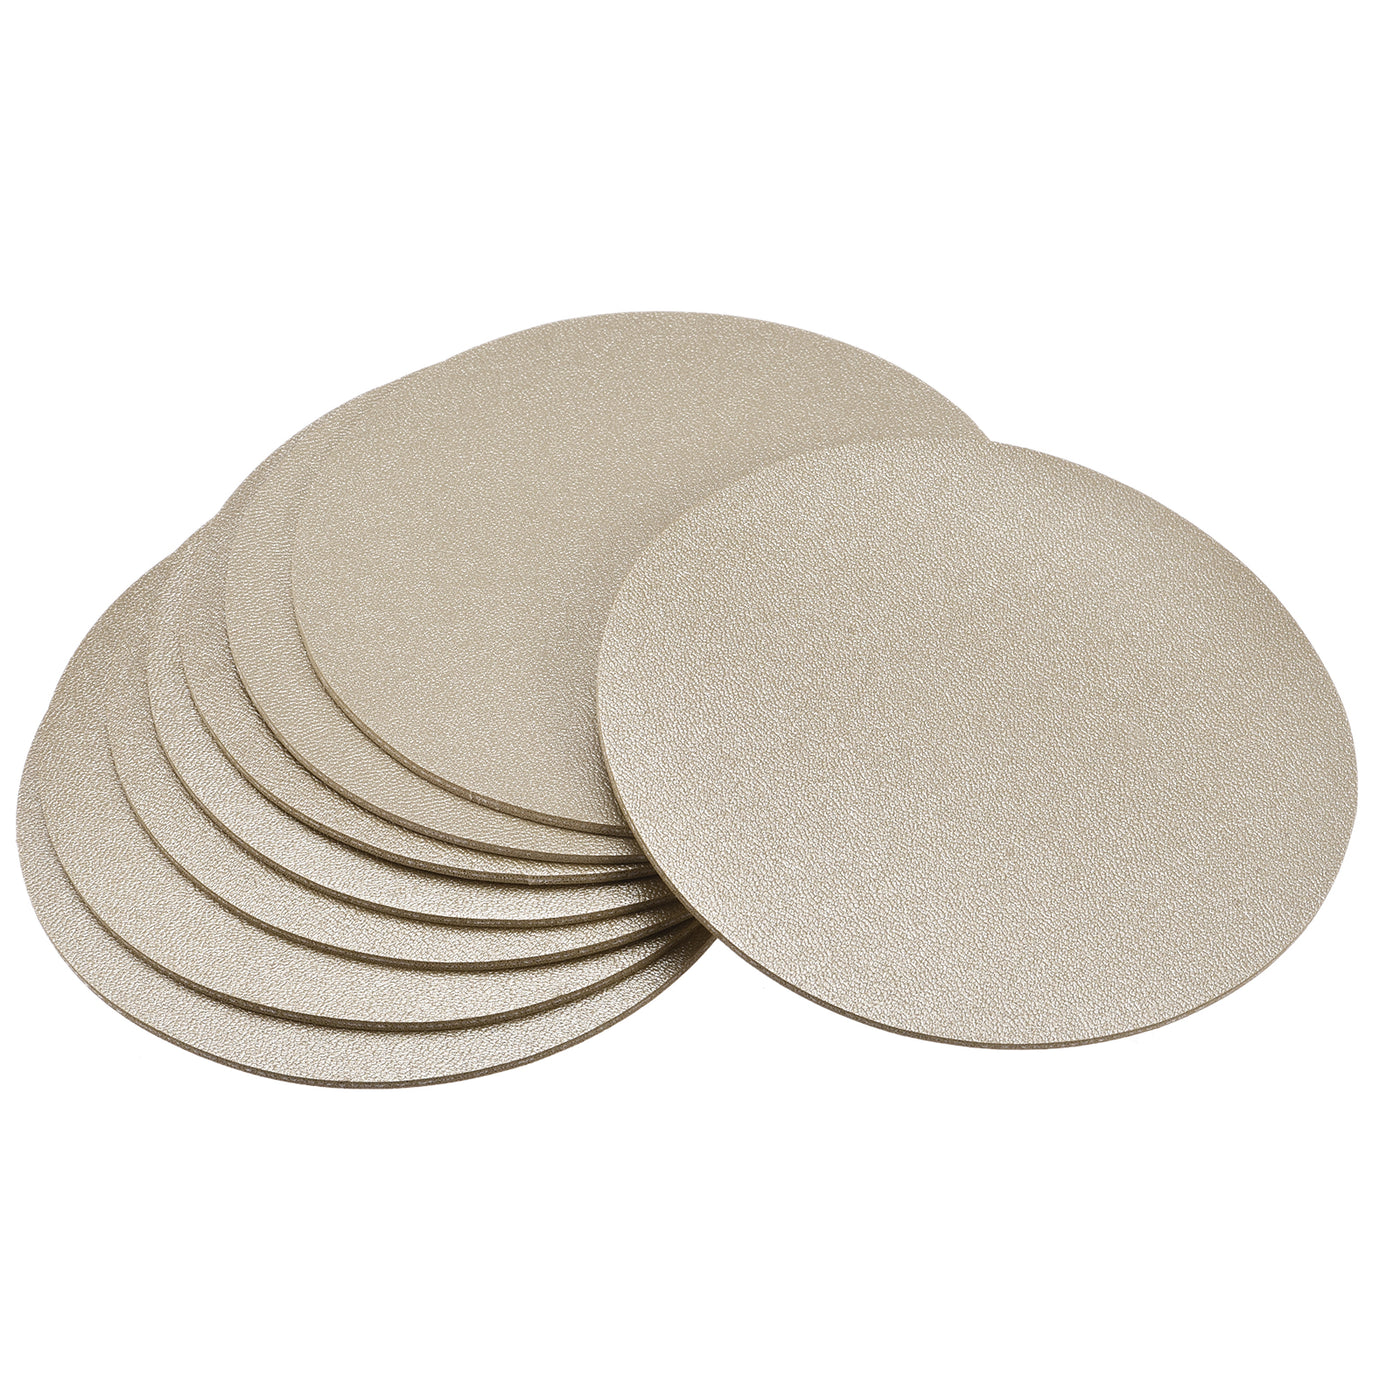 uxcell Uxcell 102mm(4.02") Round Coasters PU Cup Mat Pad for Tableware Gold Tone 6pcs